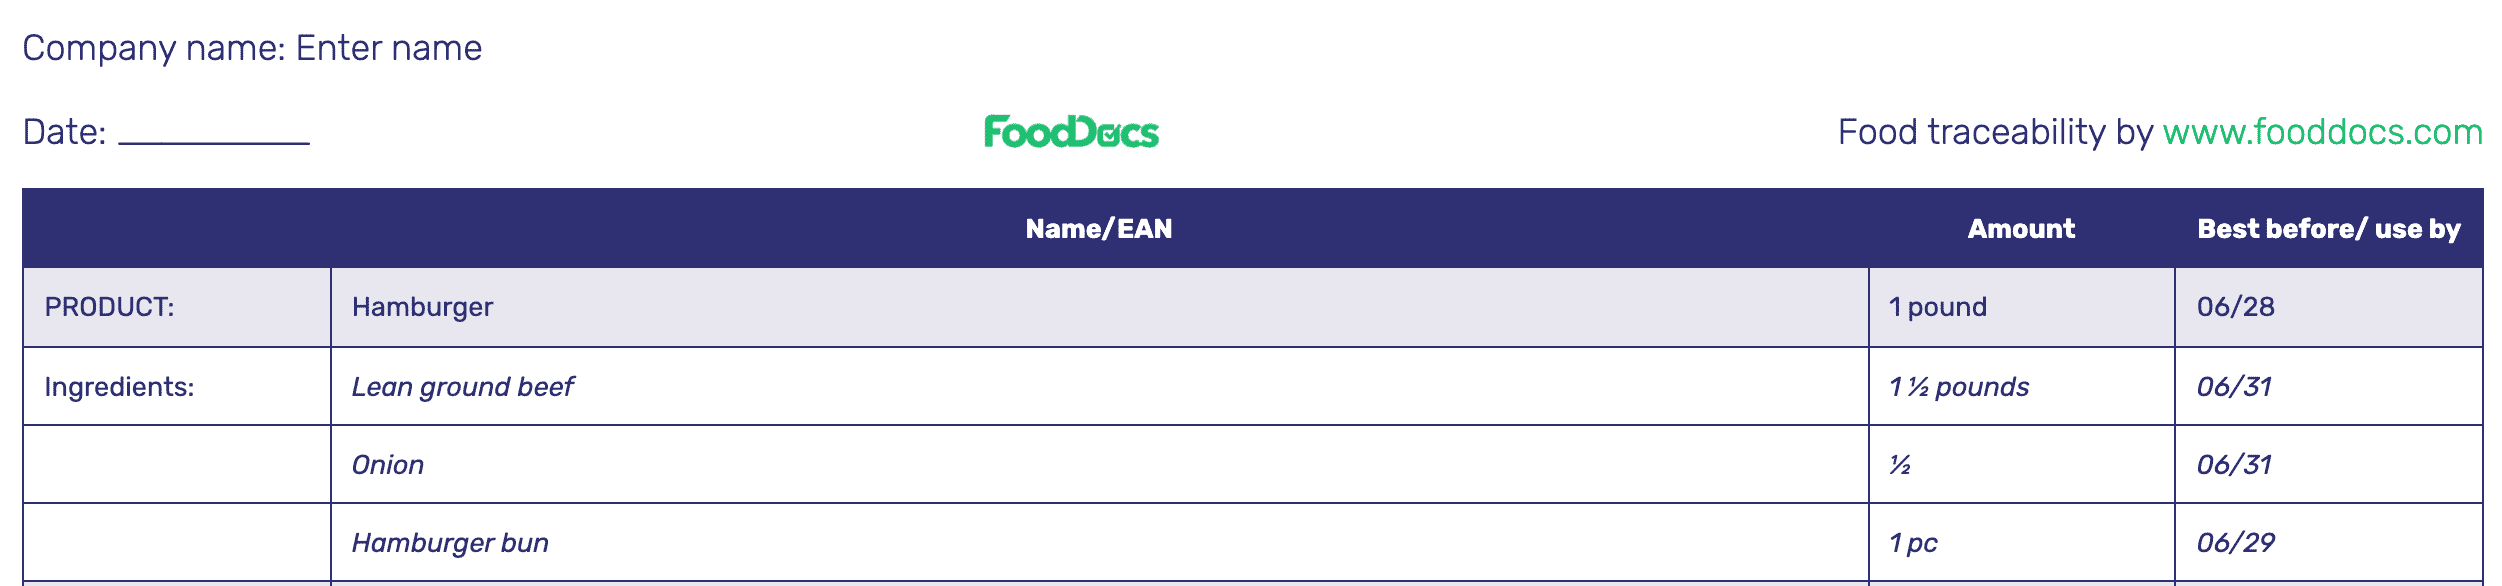 food-traceability-download-free-template